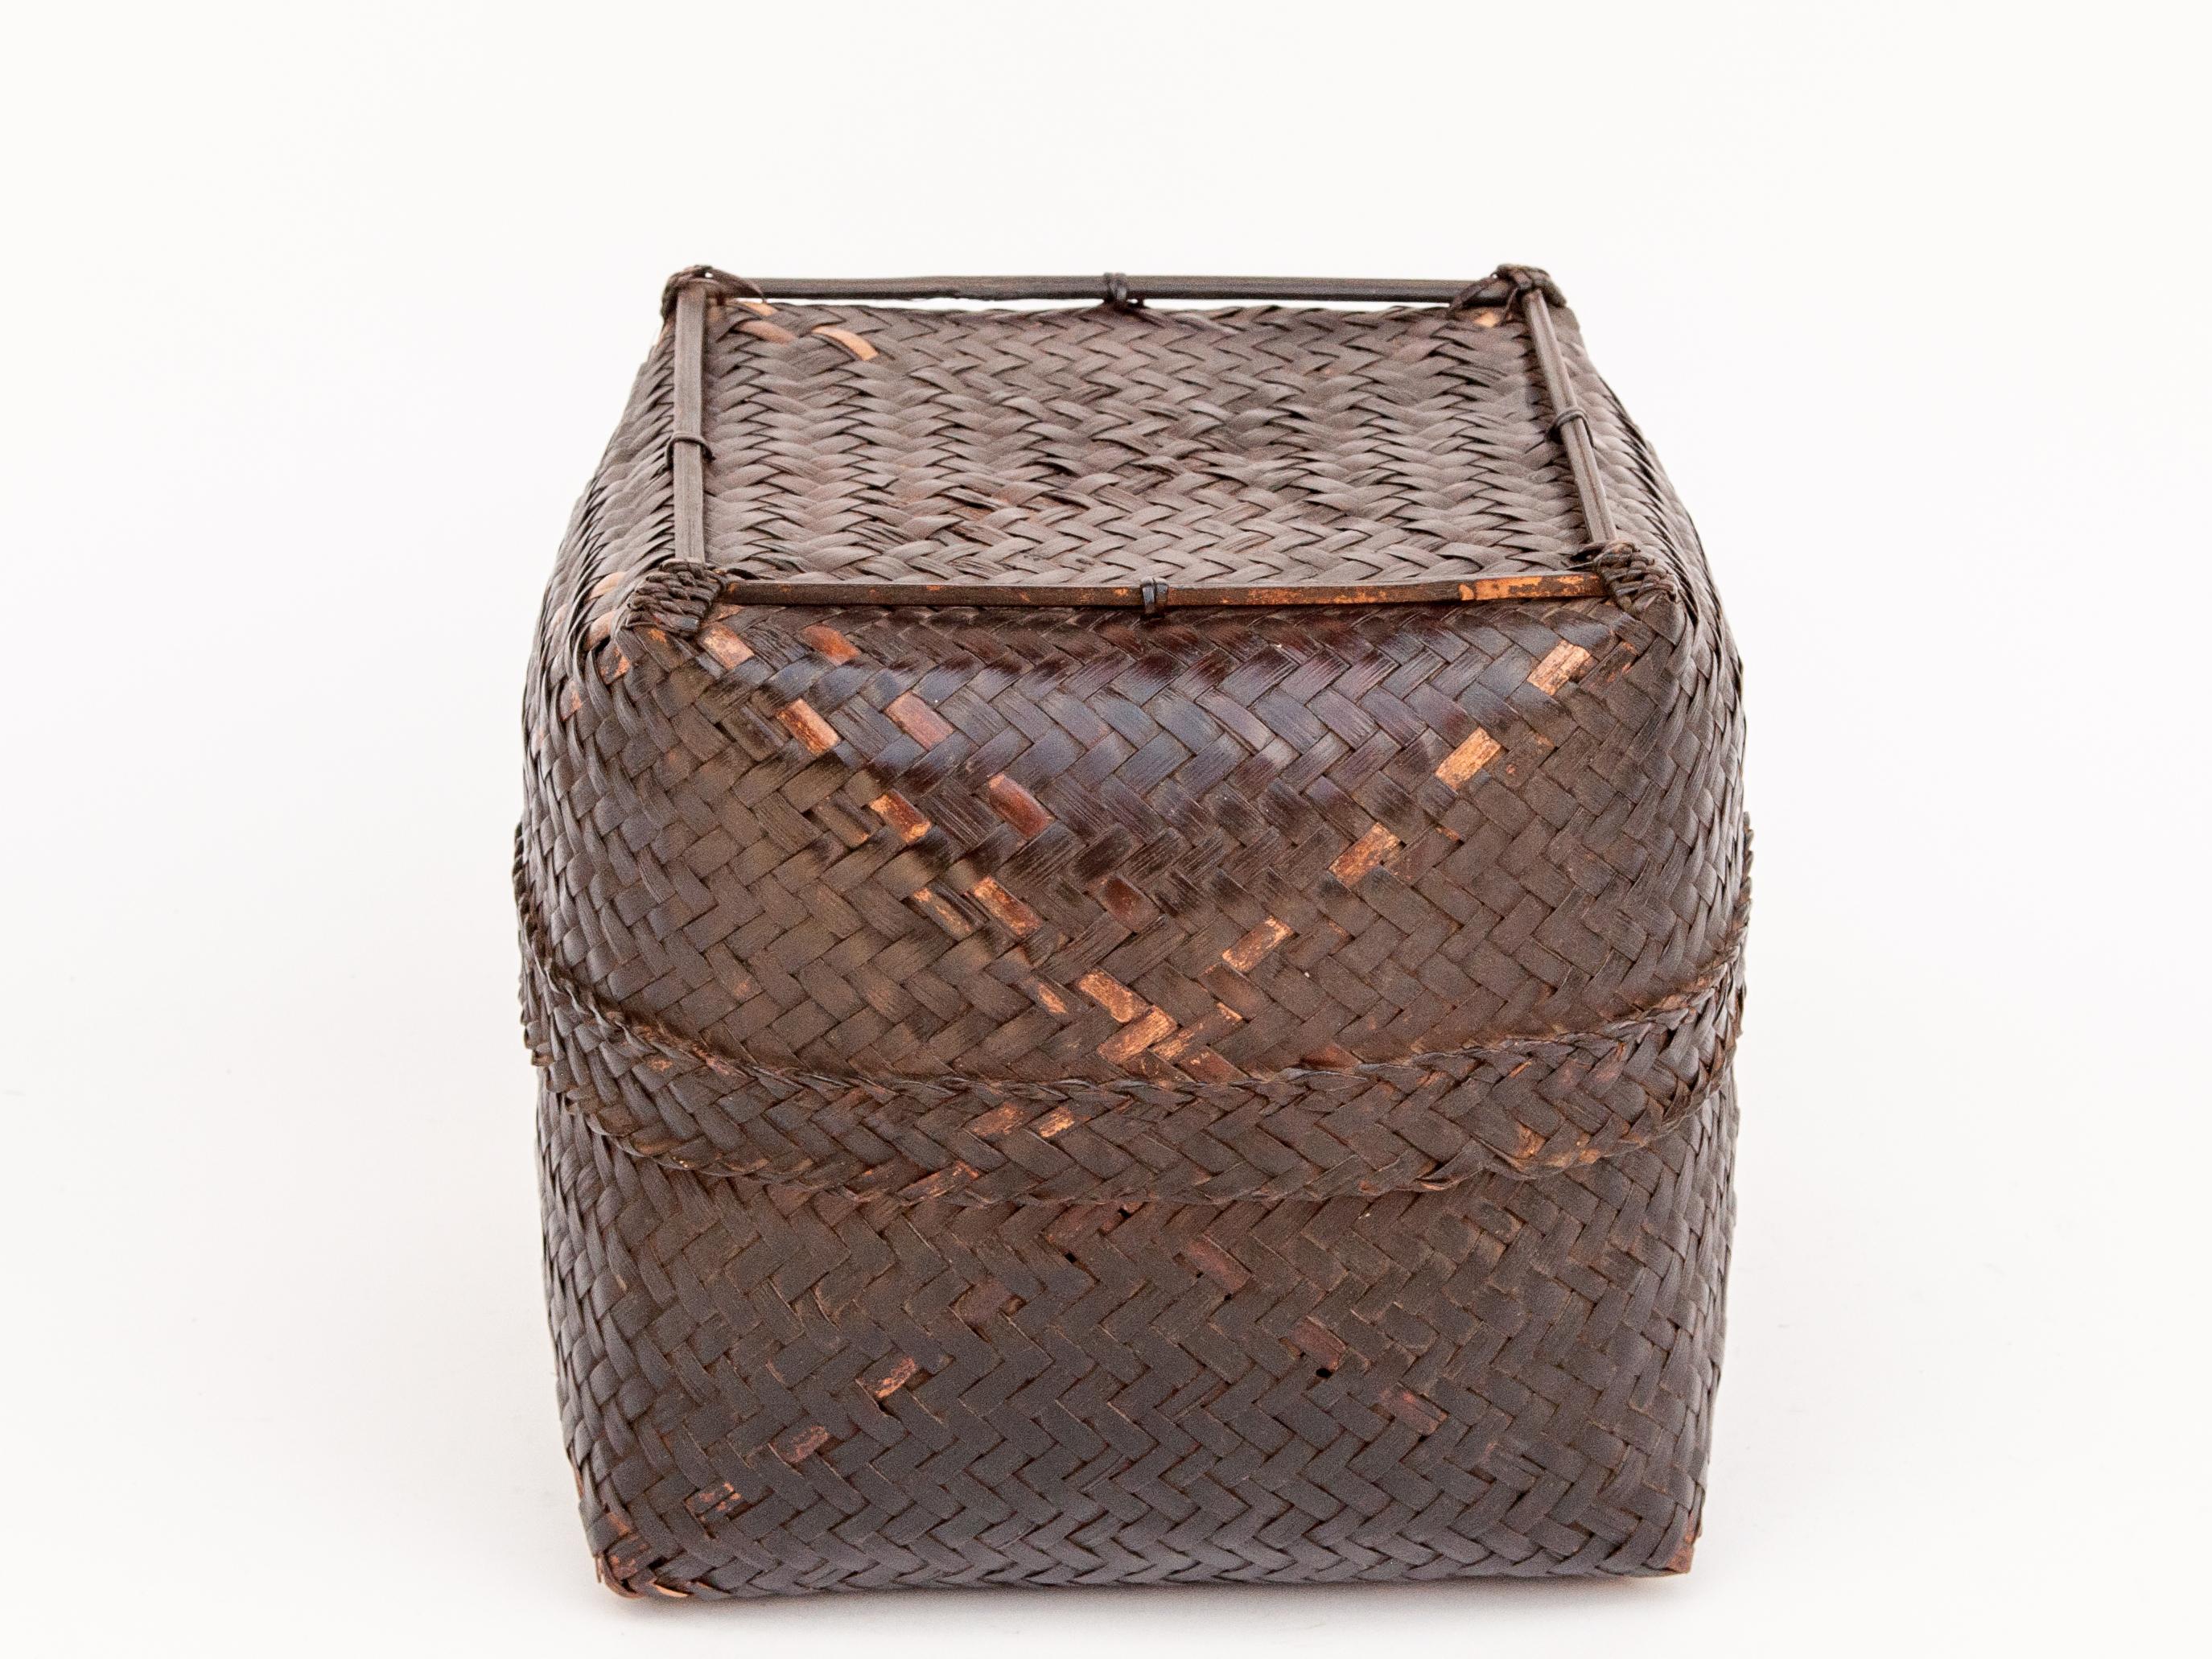 Vintage bamboo storage box basket with lid from Lombok, Indonesia, mid-late 20th century.
This sturdy bamboo basket was fashioned by hand and used to store household items and keepsakes. It is simply conceived and cleanly worked; and exhibits a